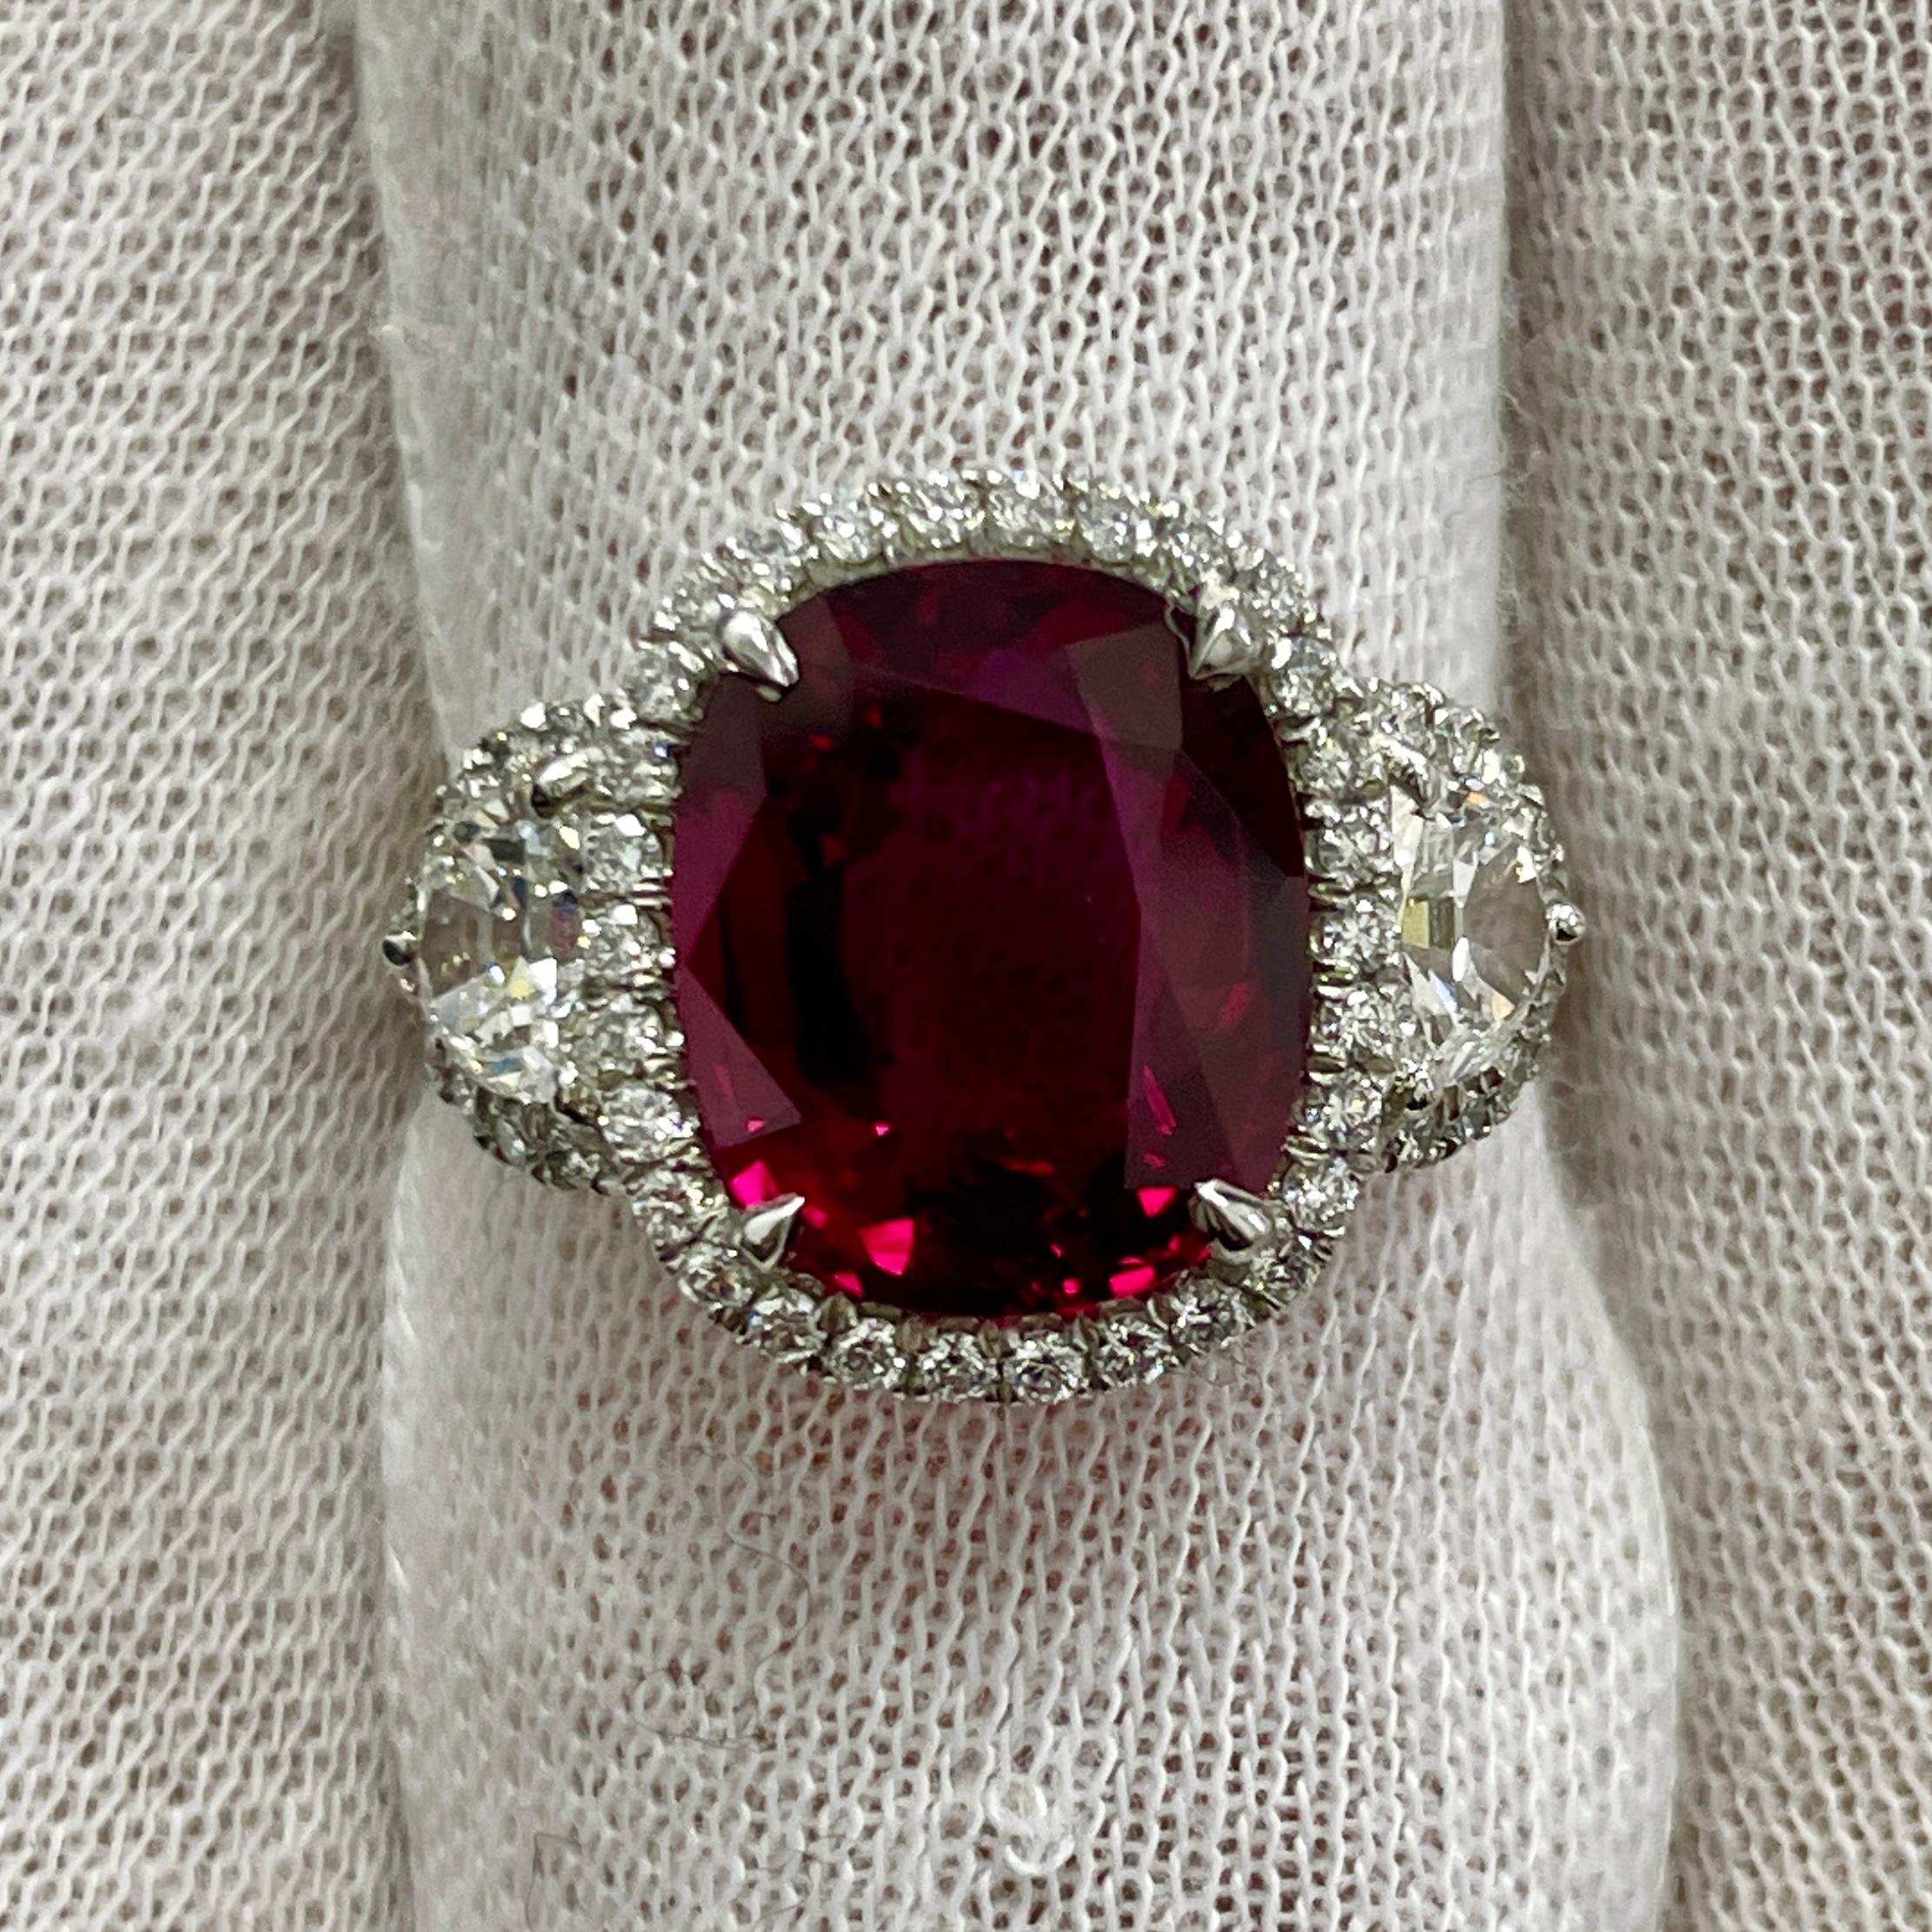 This is an incredibly spready ruby mounted in a platinum ring with 0.60Ct of brilliant white half-moon diamonds. Suitable for any occasion!